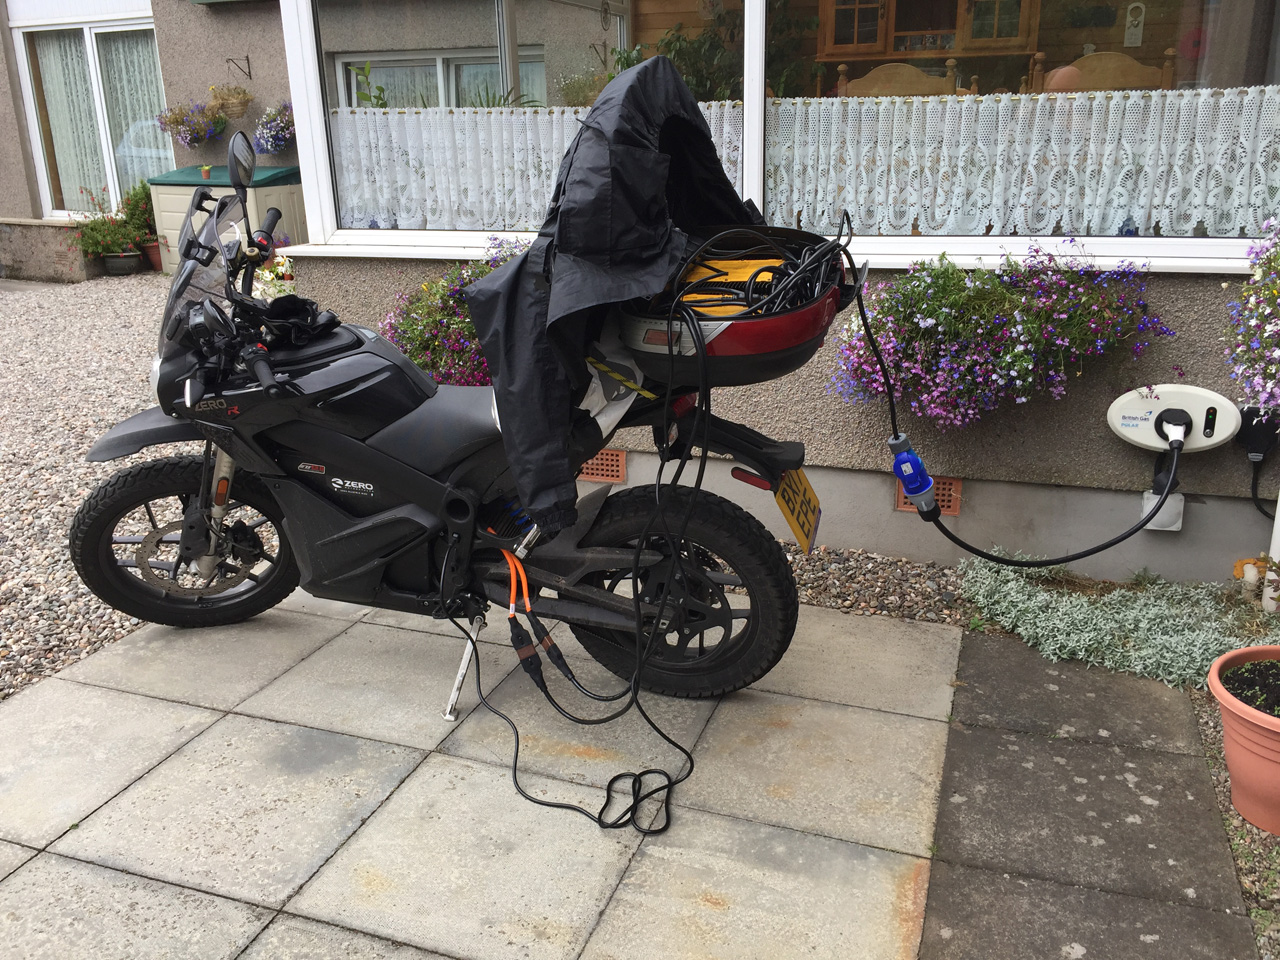 John Chivers' Zero DSR electric motorcycle charging at Fendoch Guest House, Crieff.